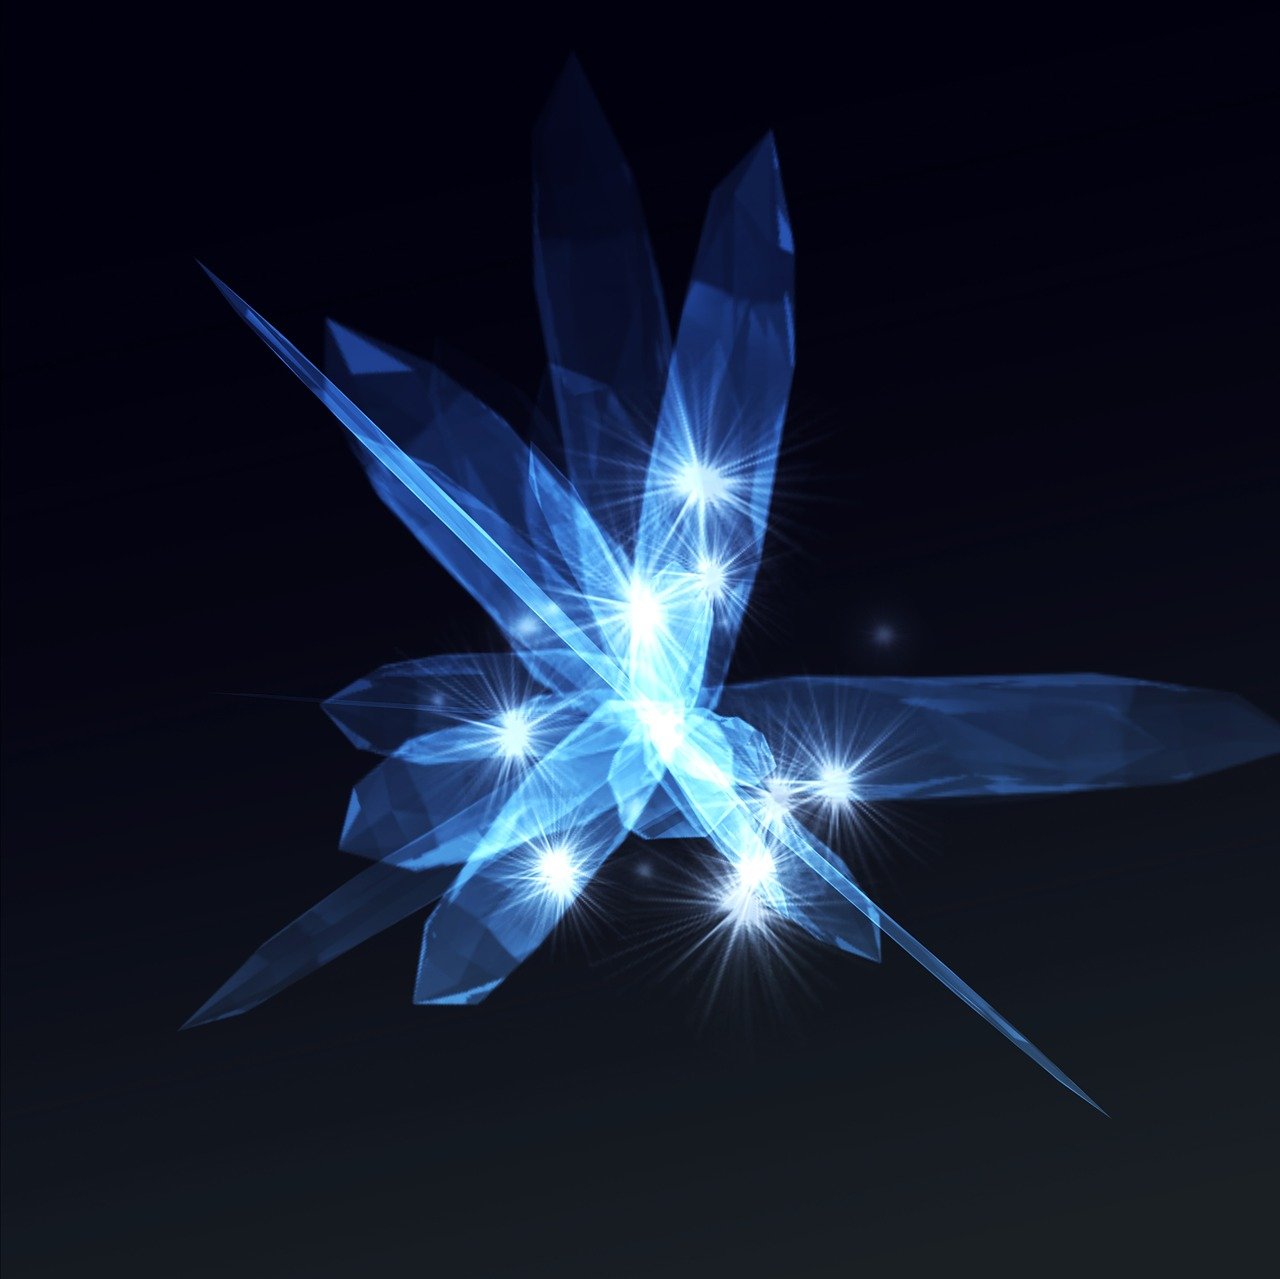 a close up of a blue flower on a black background, digital art, crystal cubism, star shining in space, quartz crystal, transparent wings, glowing - thin - wires